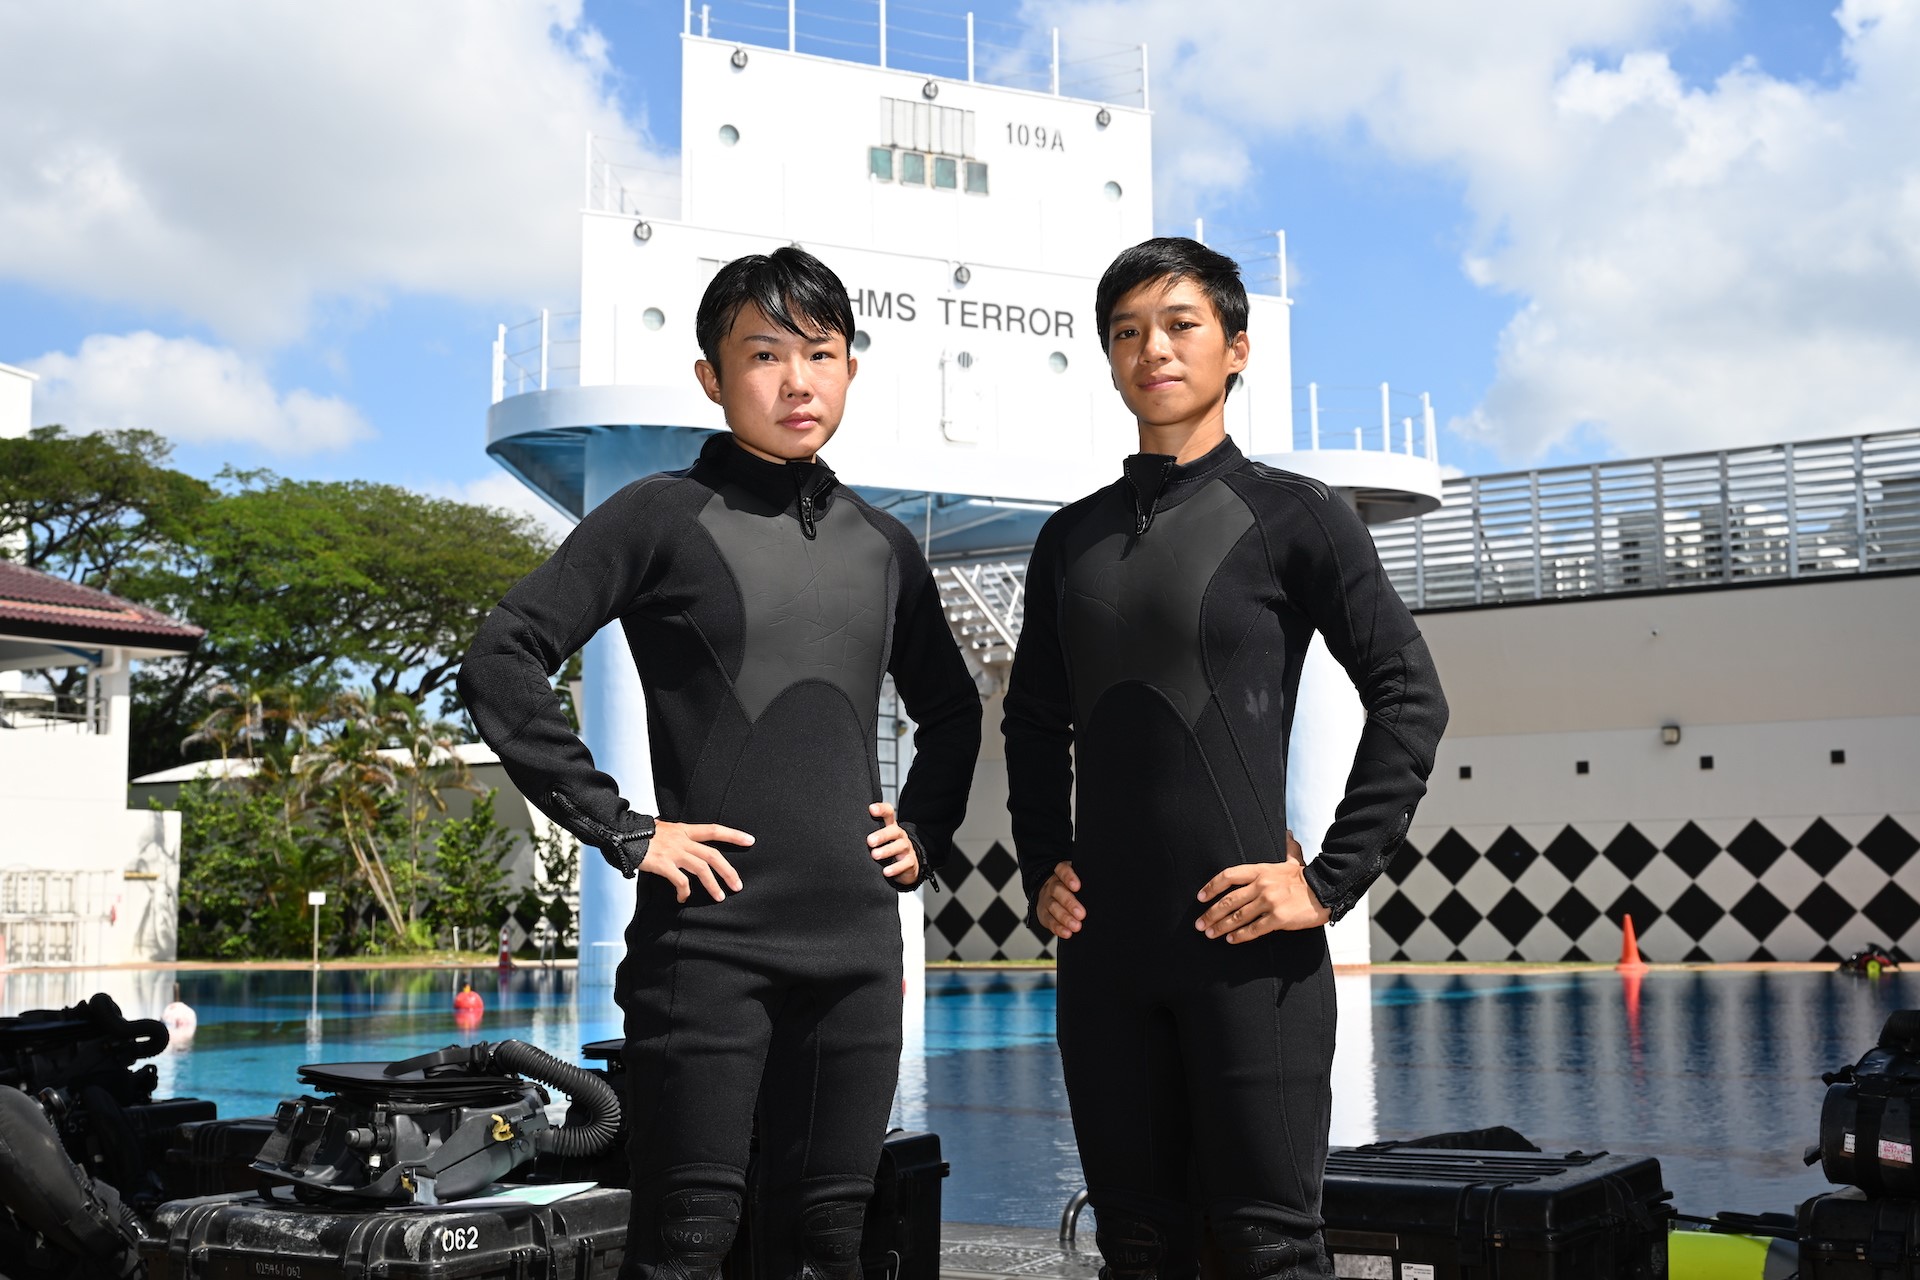 Two new female combat divers join NDU's ranks